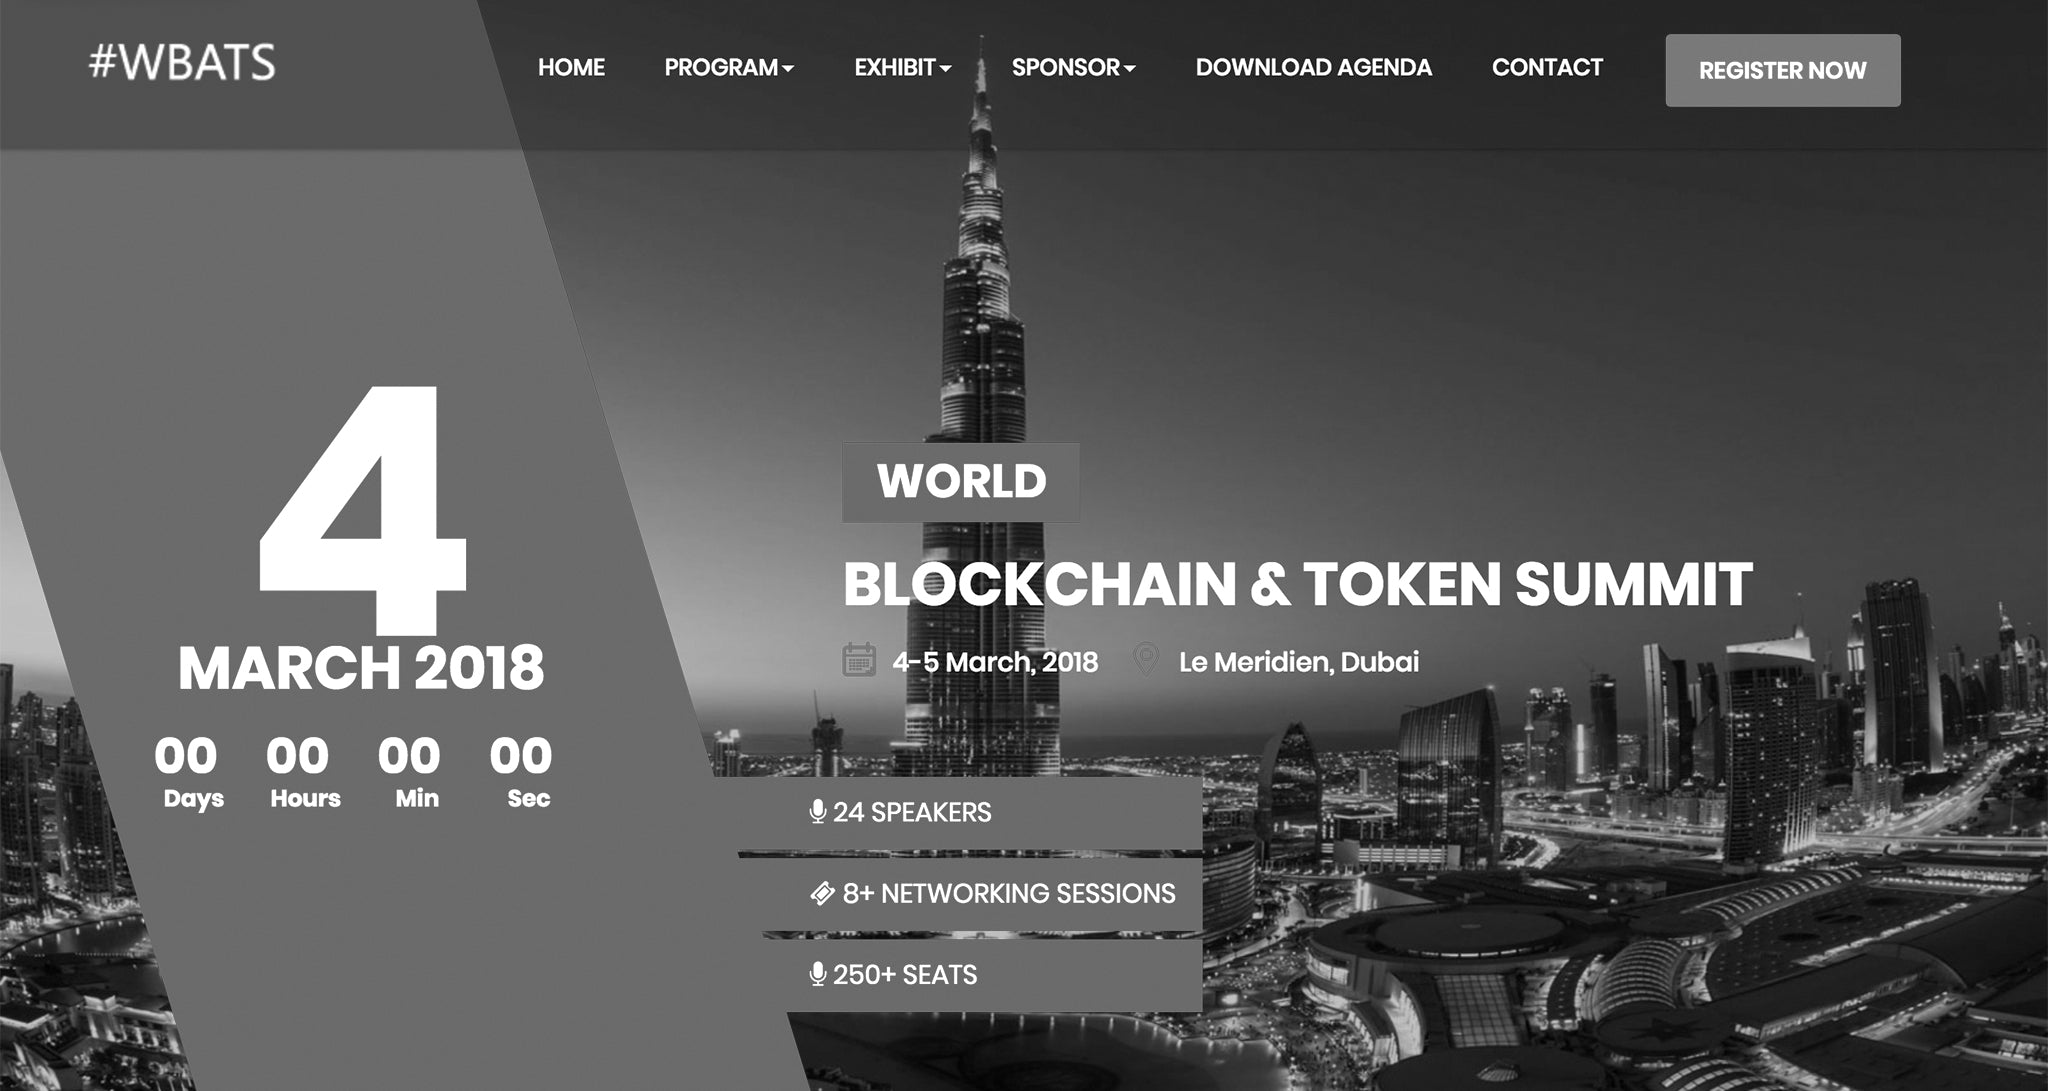 ClearFoundation to Present at World Blockchain and Token Summit March 4-5